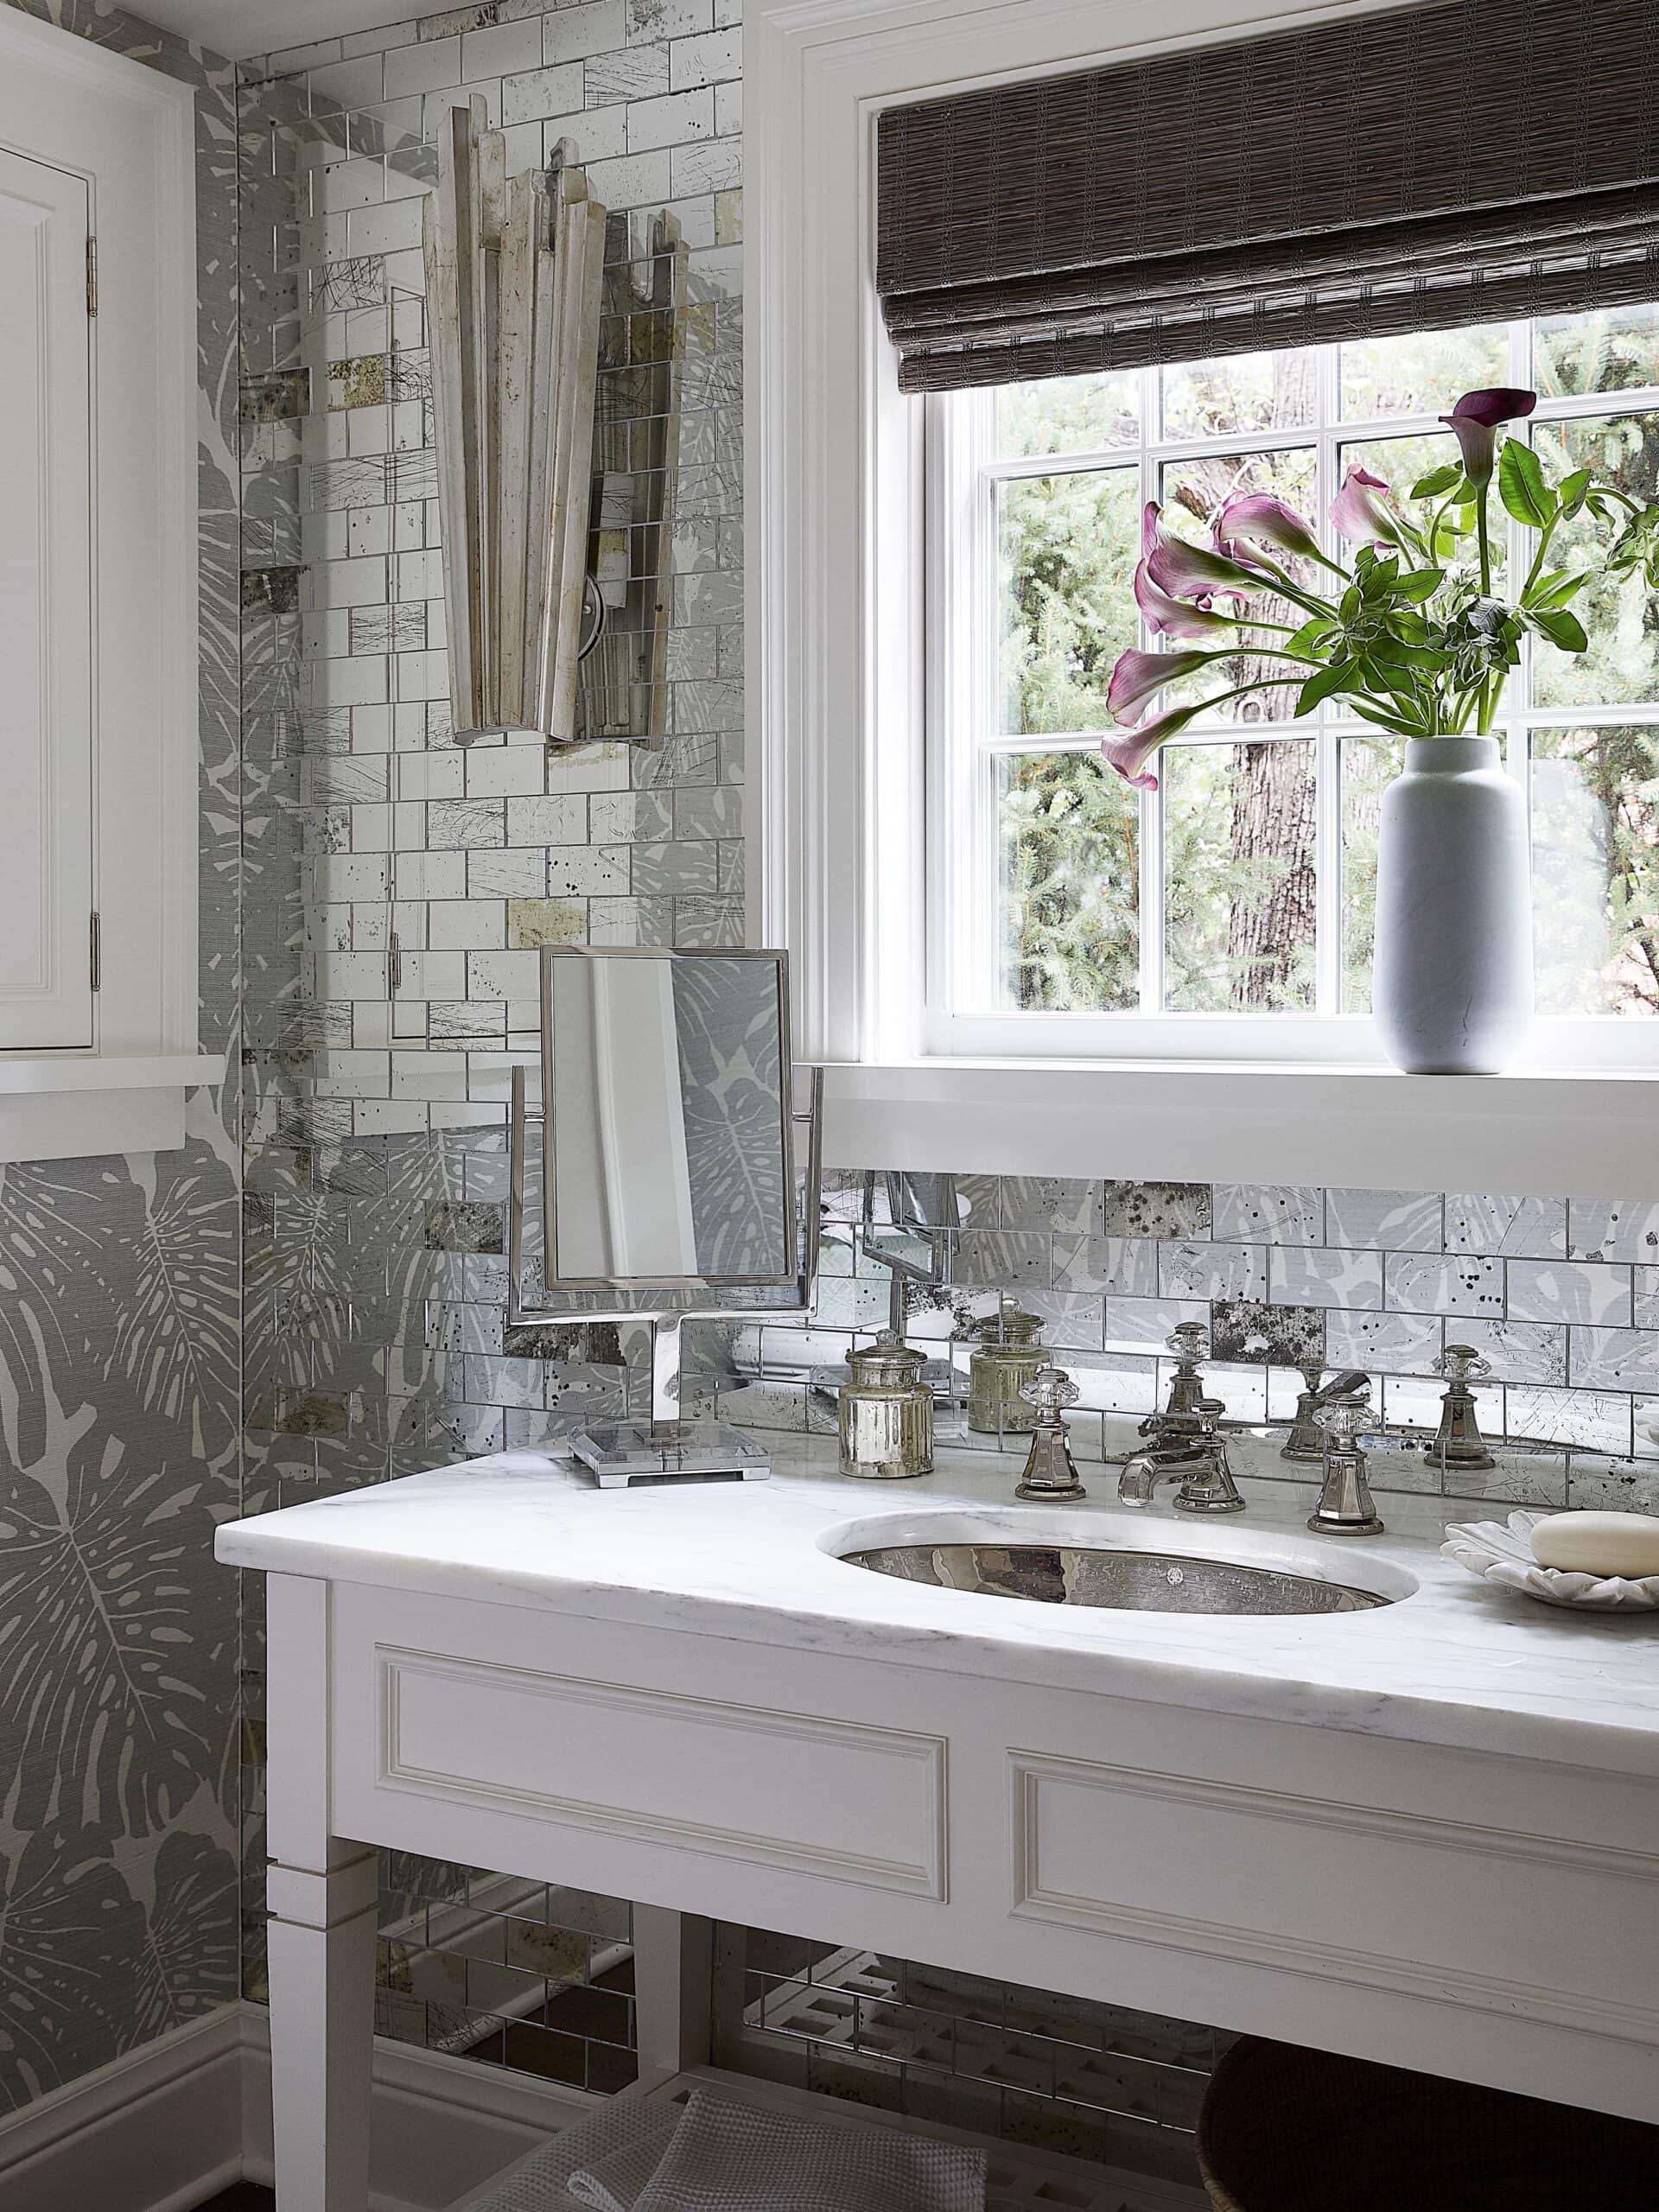 Powder room with antique mirrored subway tile and palm wallpaper